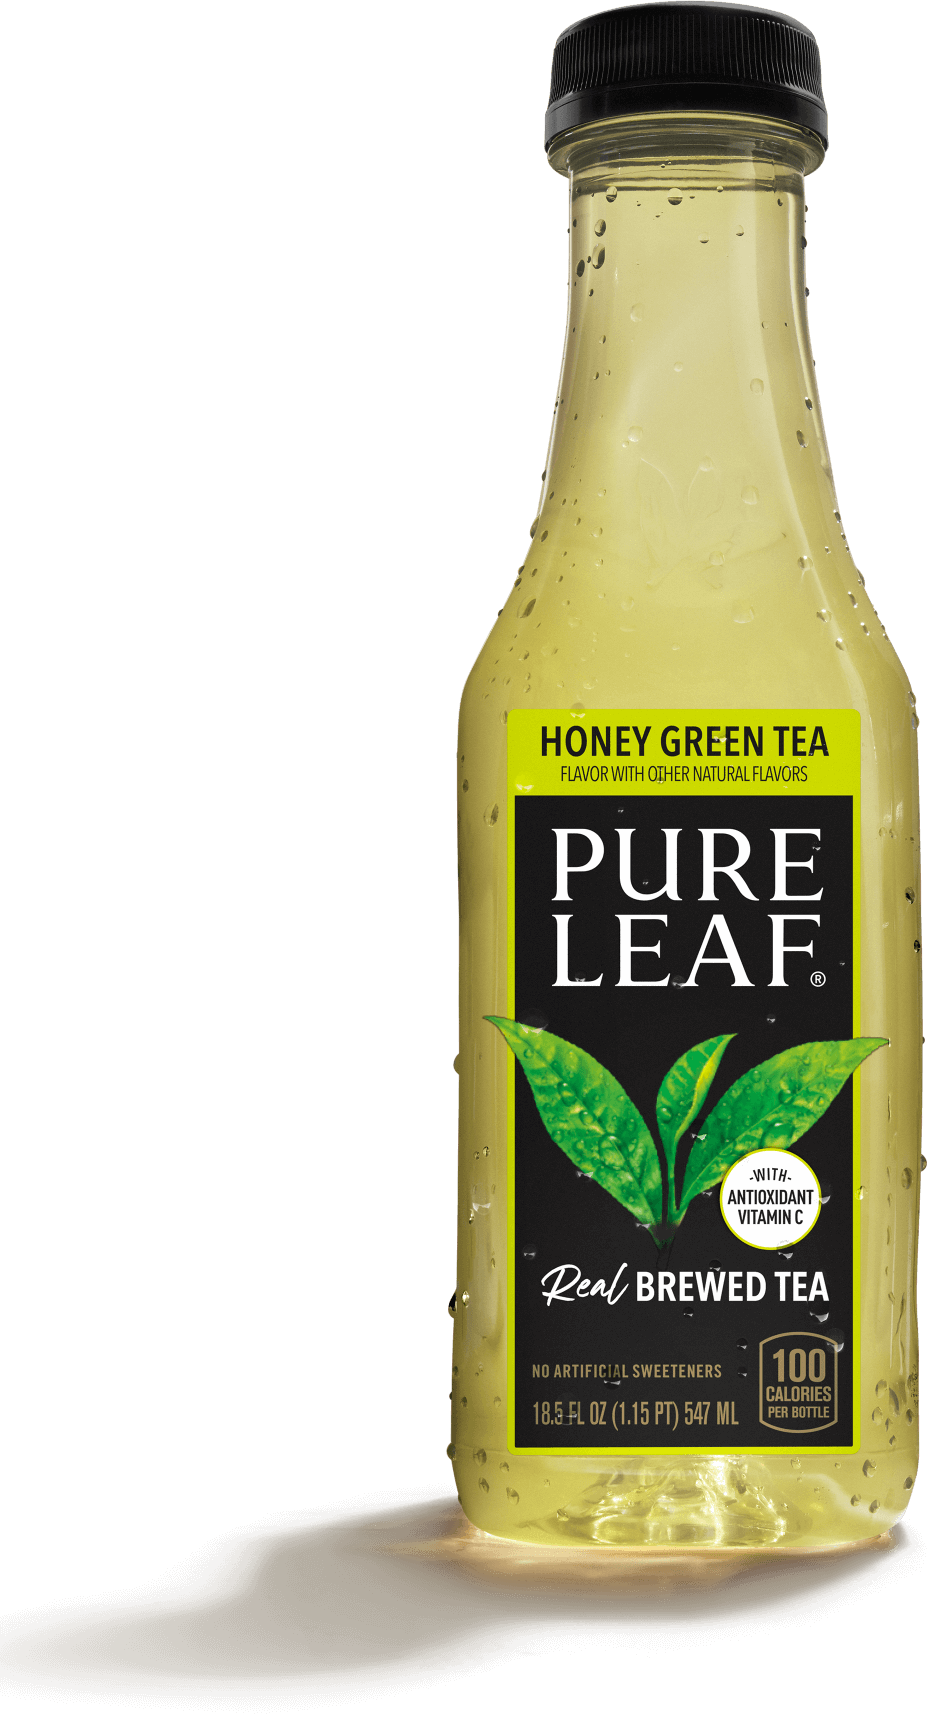 Pure Leaf is Putting the Ice in National Iced Tea Day with Diamond